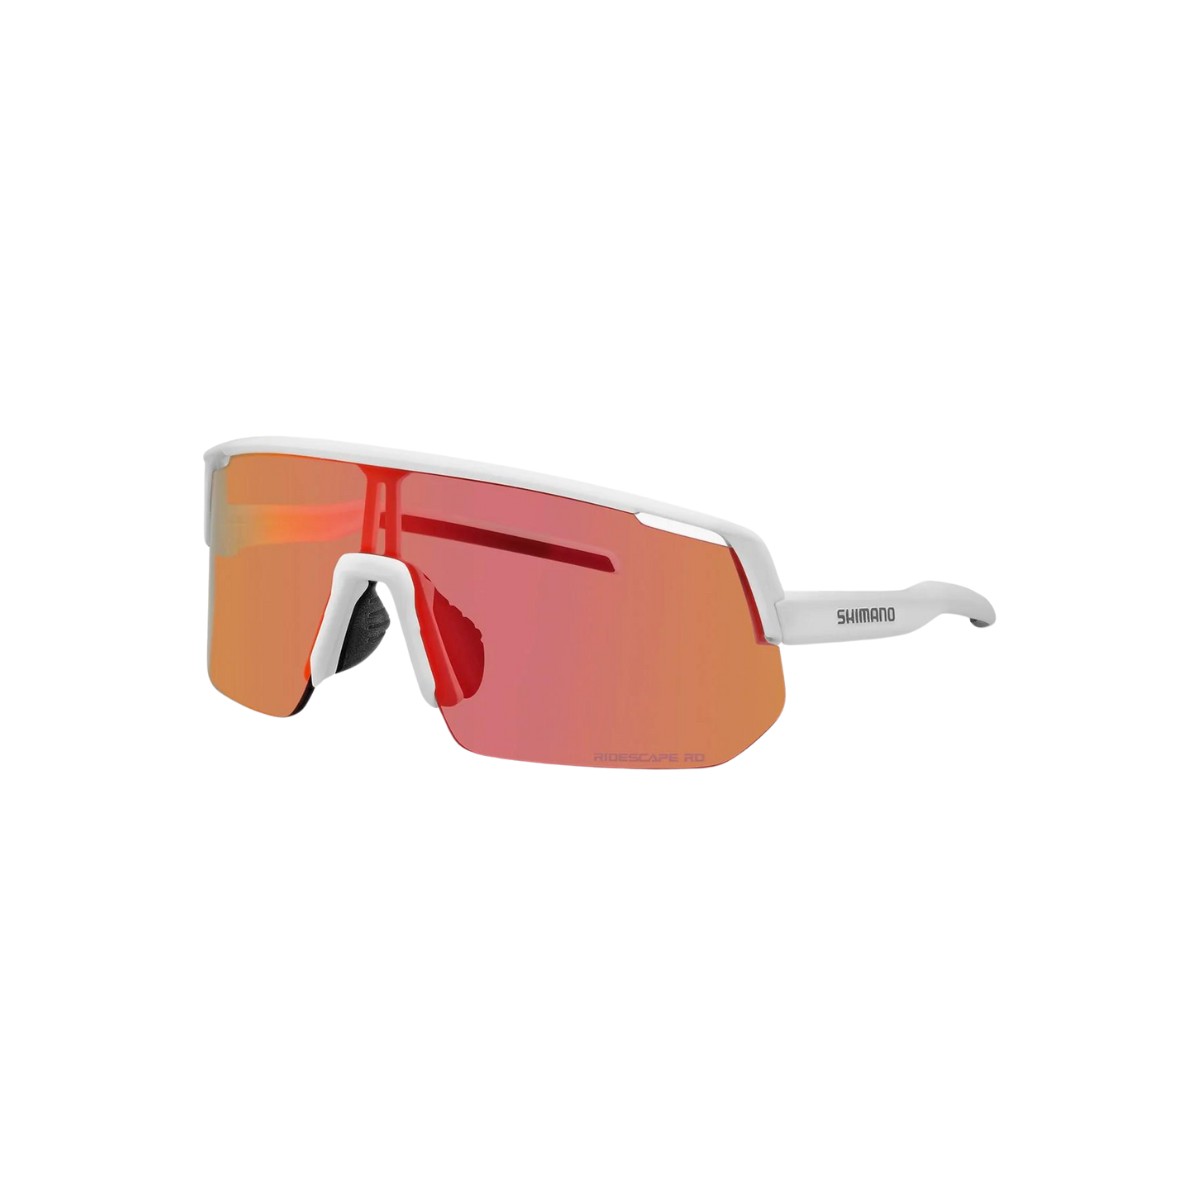 Image of Shimano Technium L Brille Weiß Rosa Linse